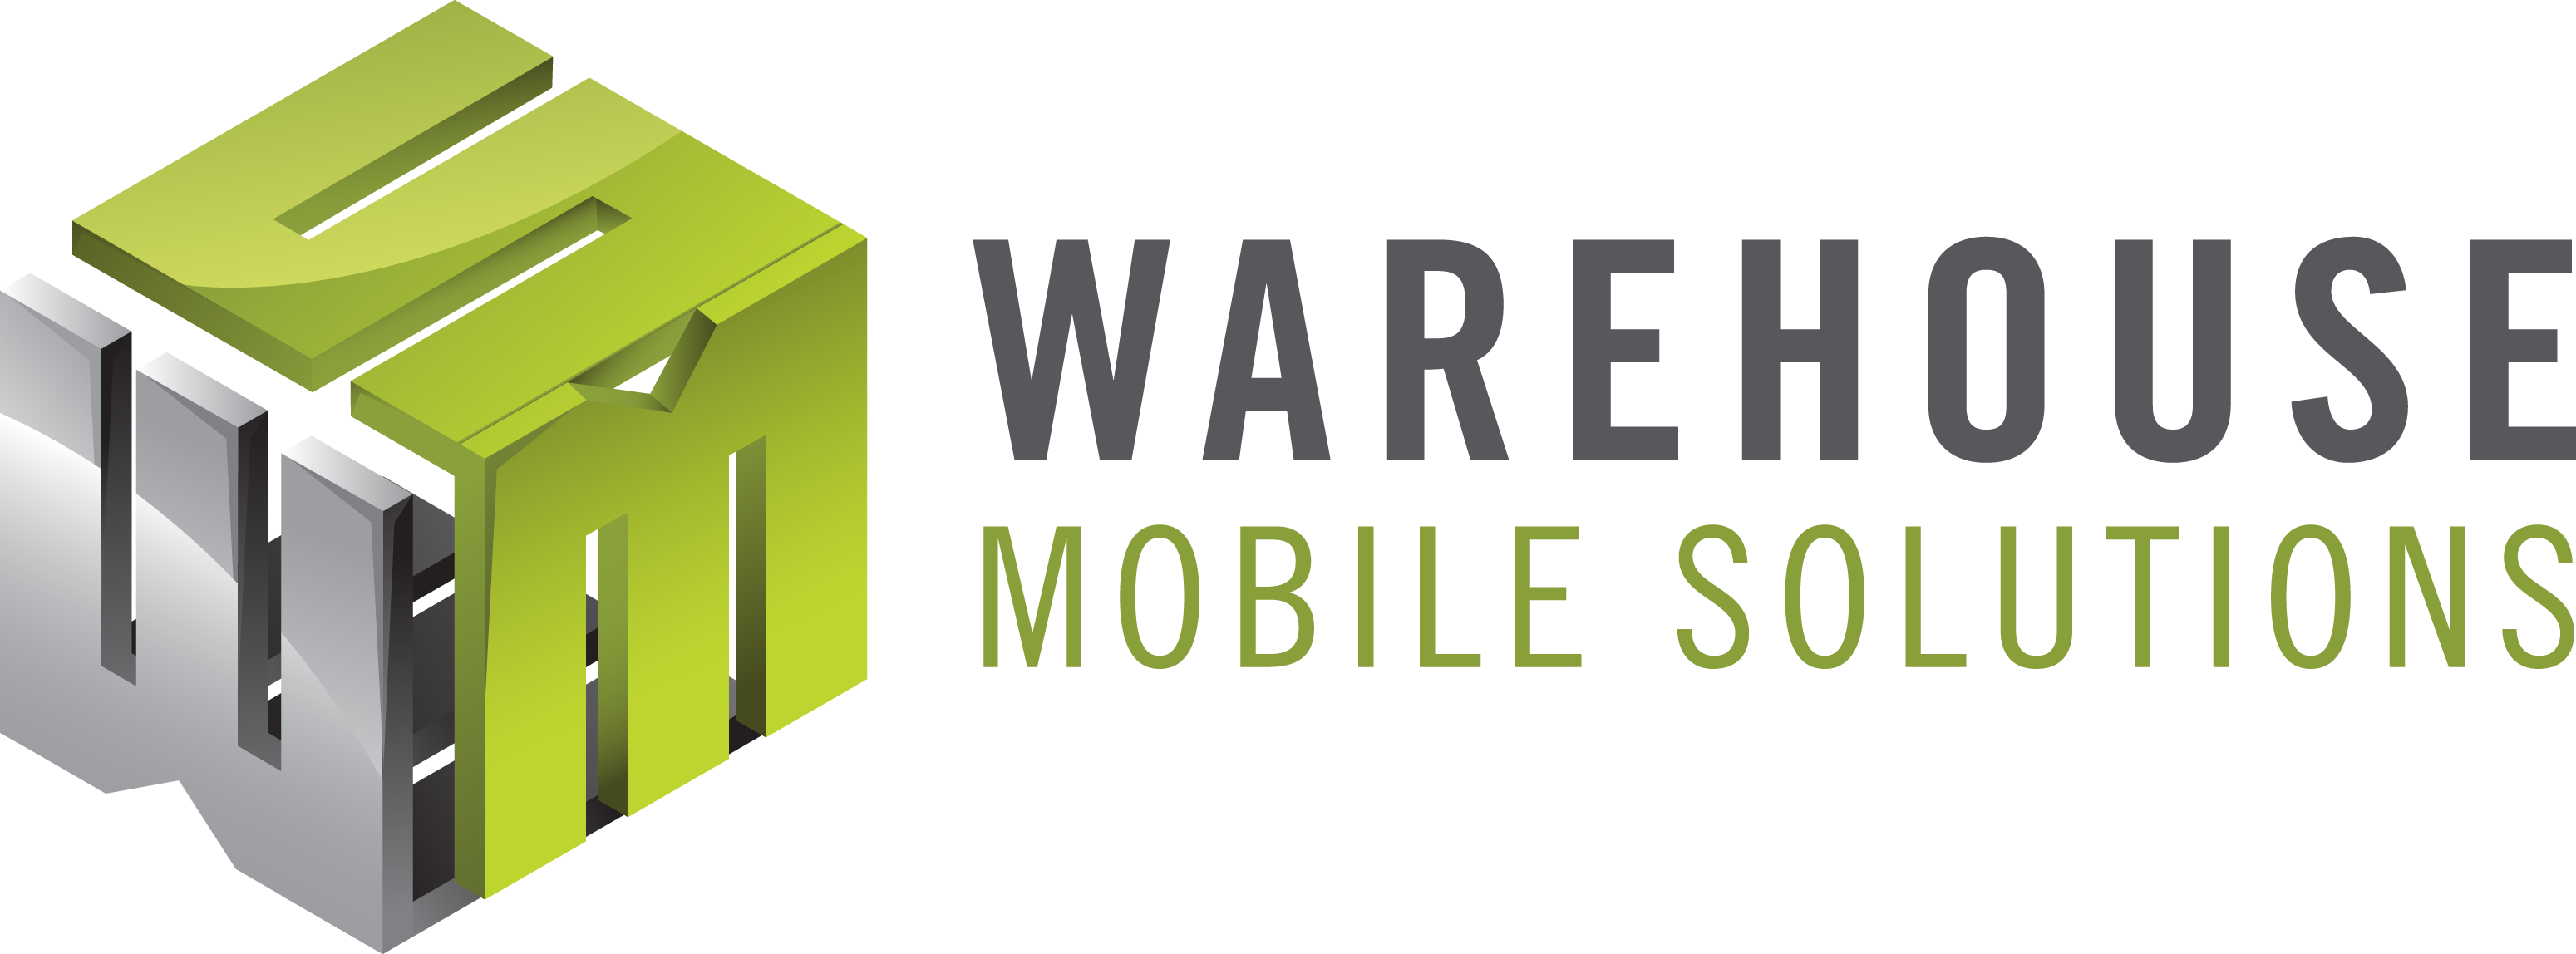 Warehouse Mobile Solutions